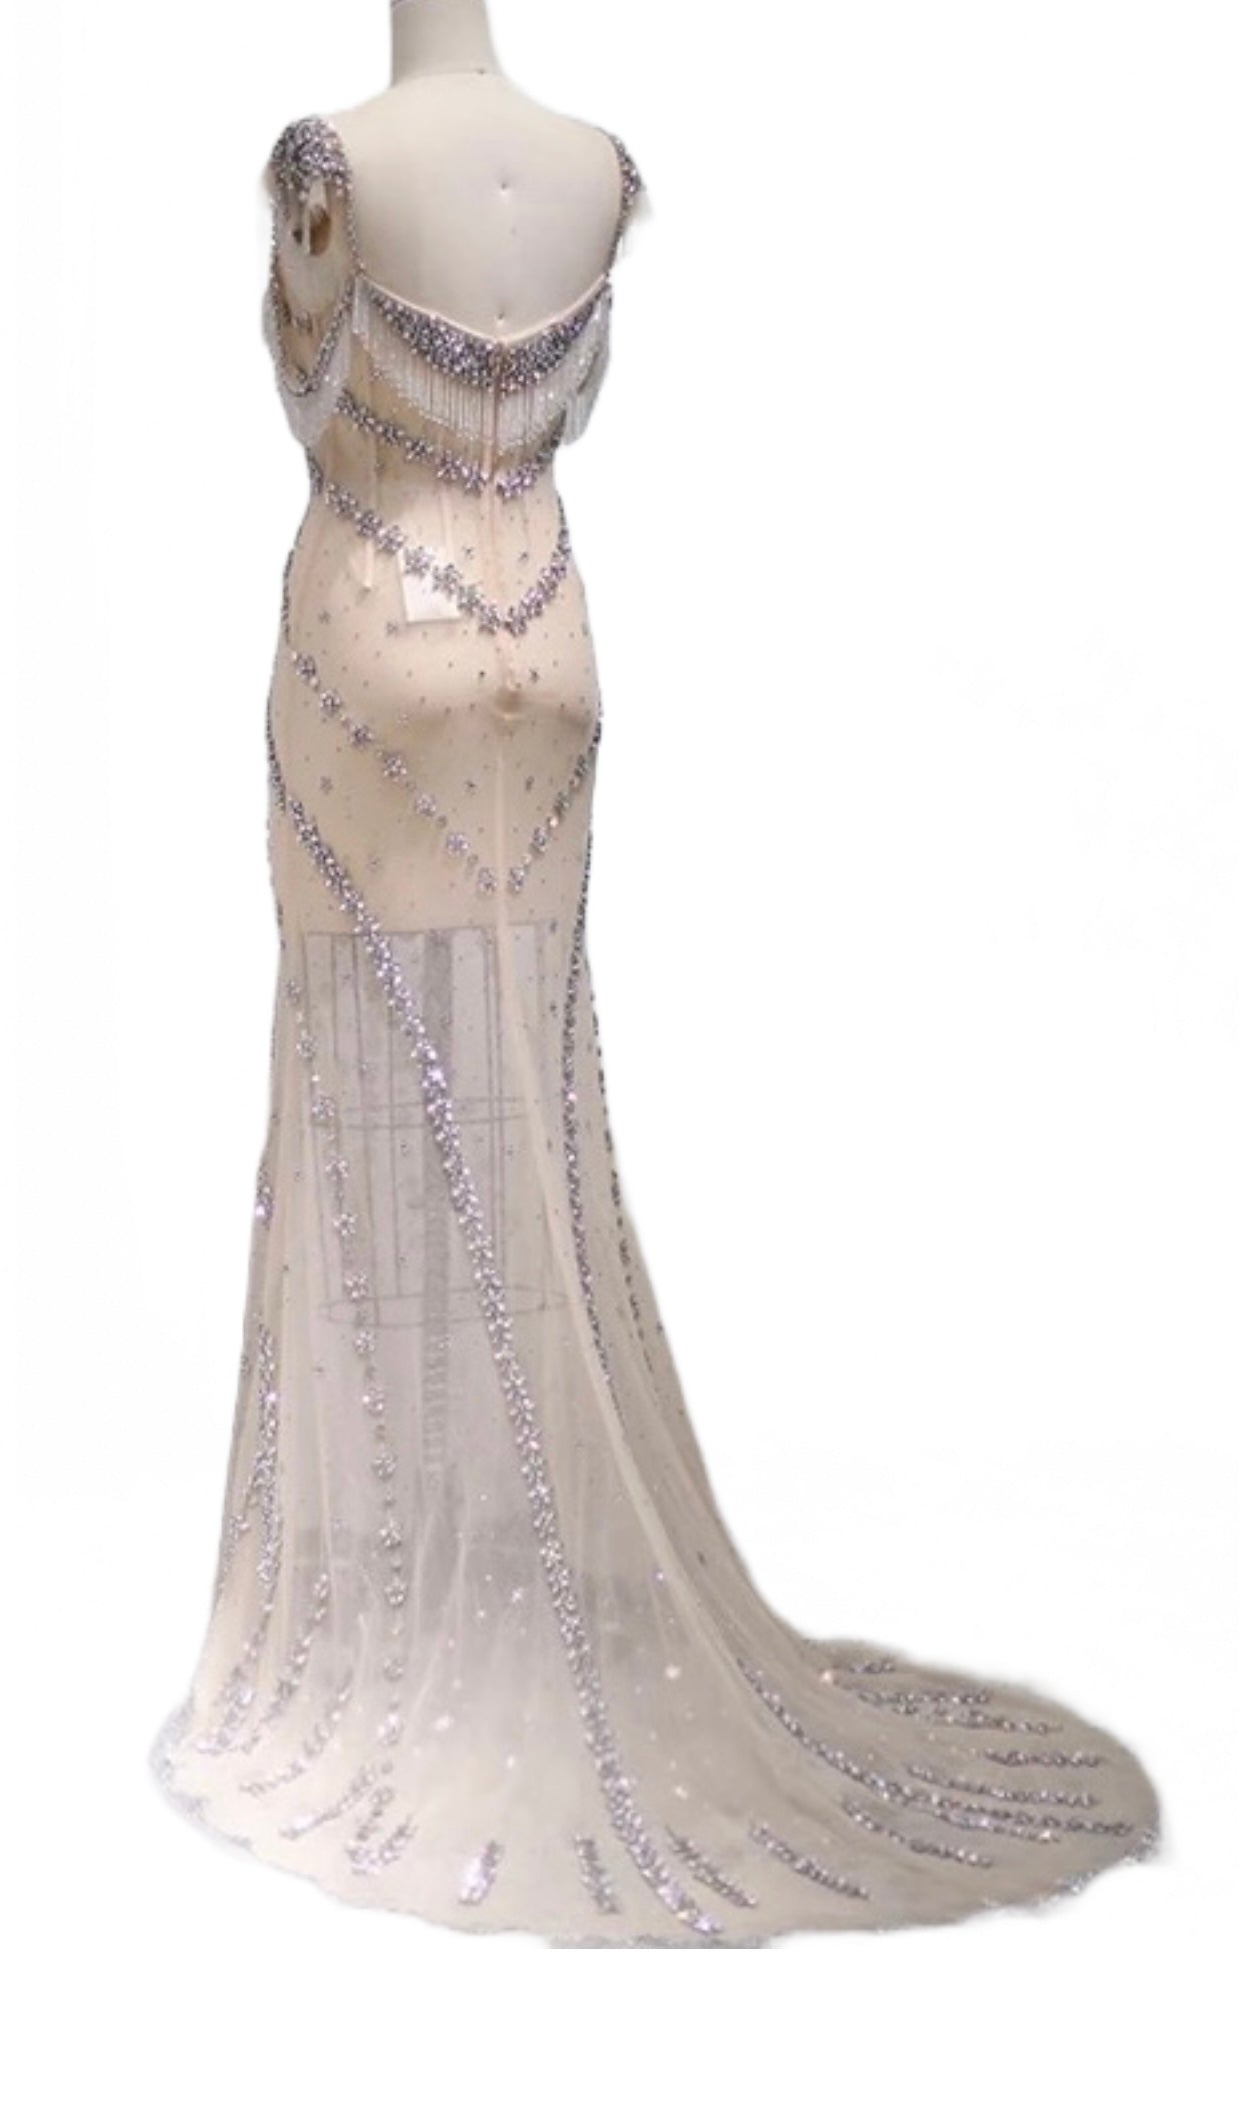 KENDALL GOWN